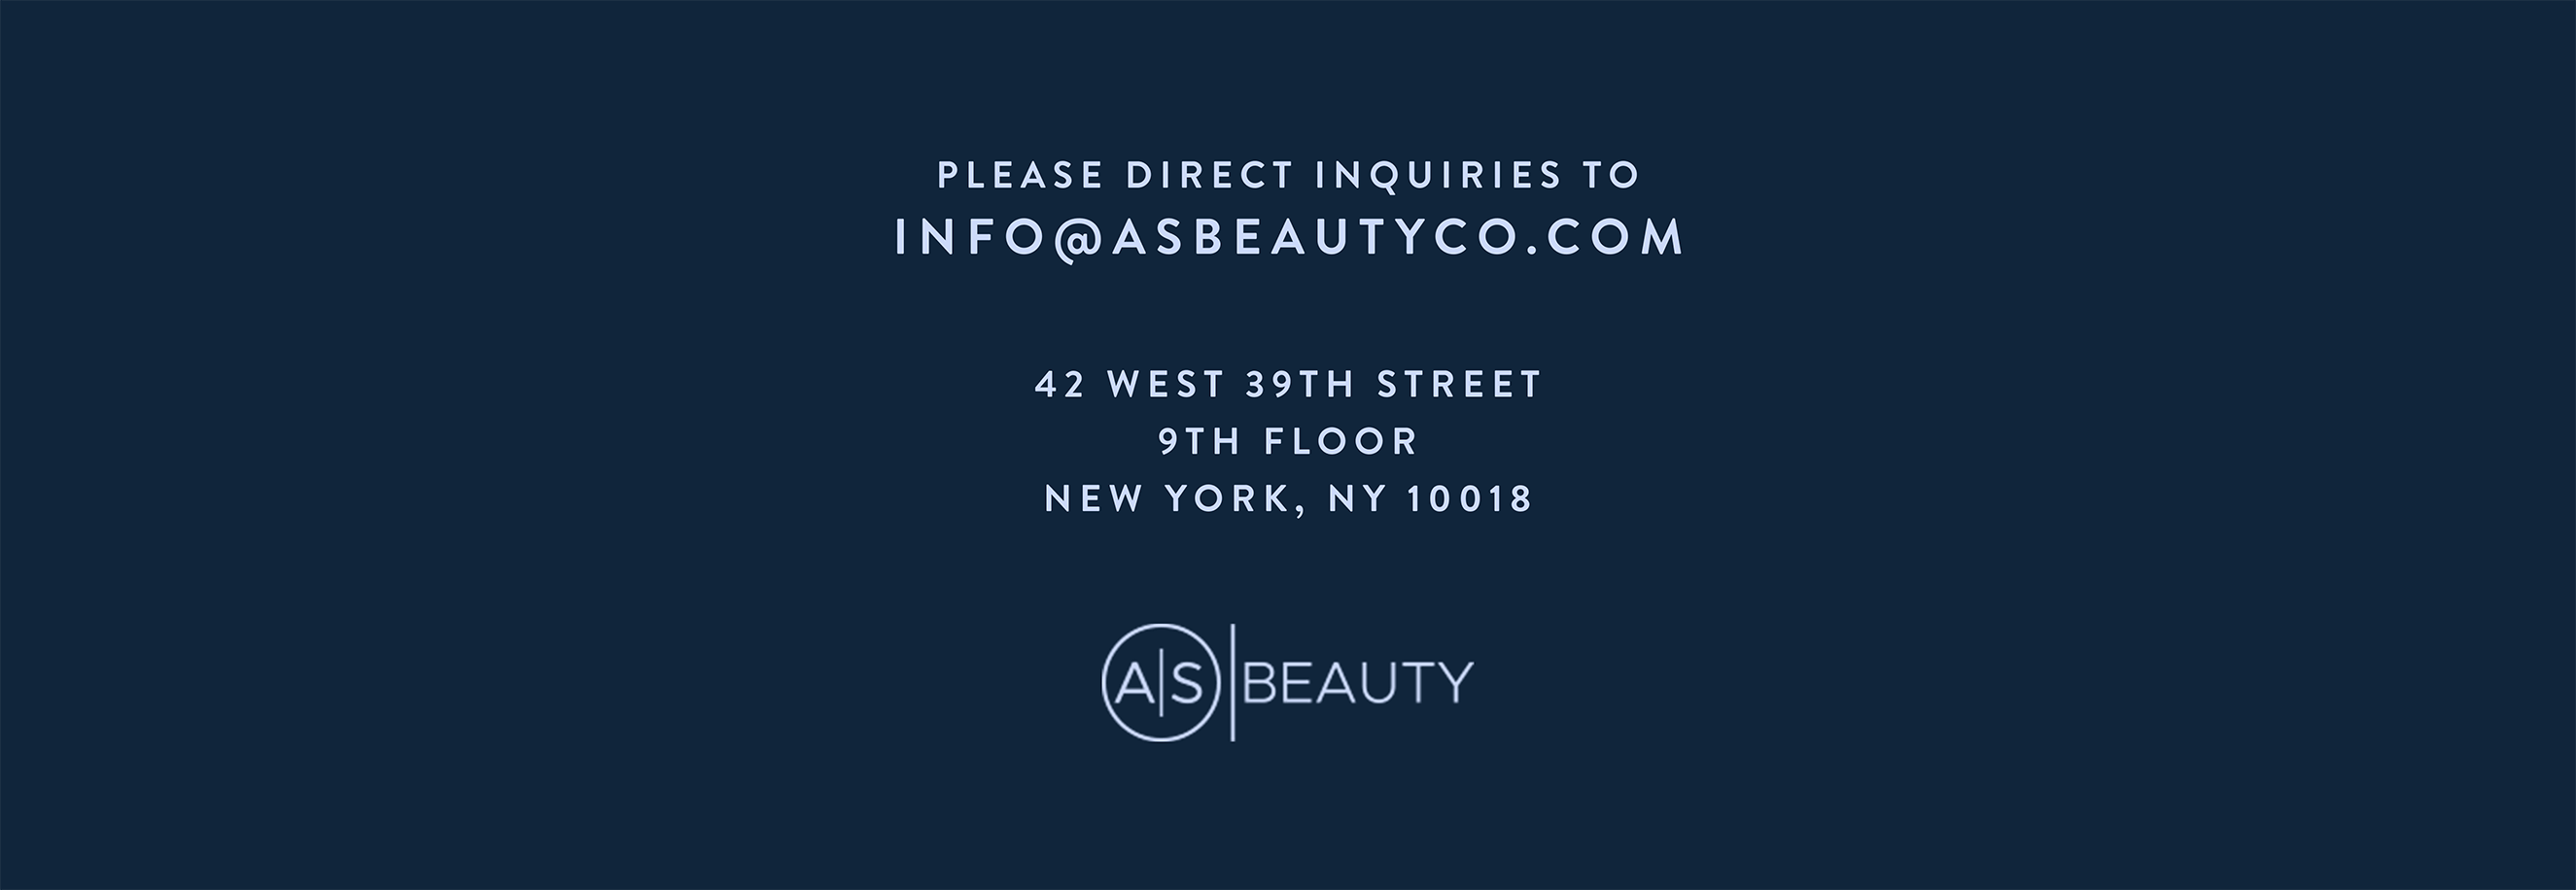 Please direct inquiries to info@asbeautyco.com. 42 West 39th Street 9th floor, New York, NY 10018. AS Beauty.